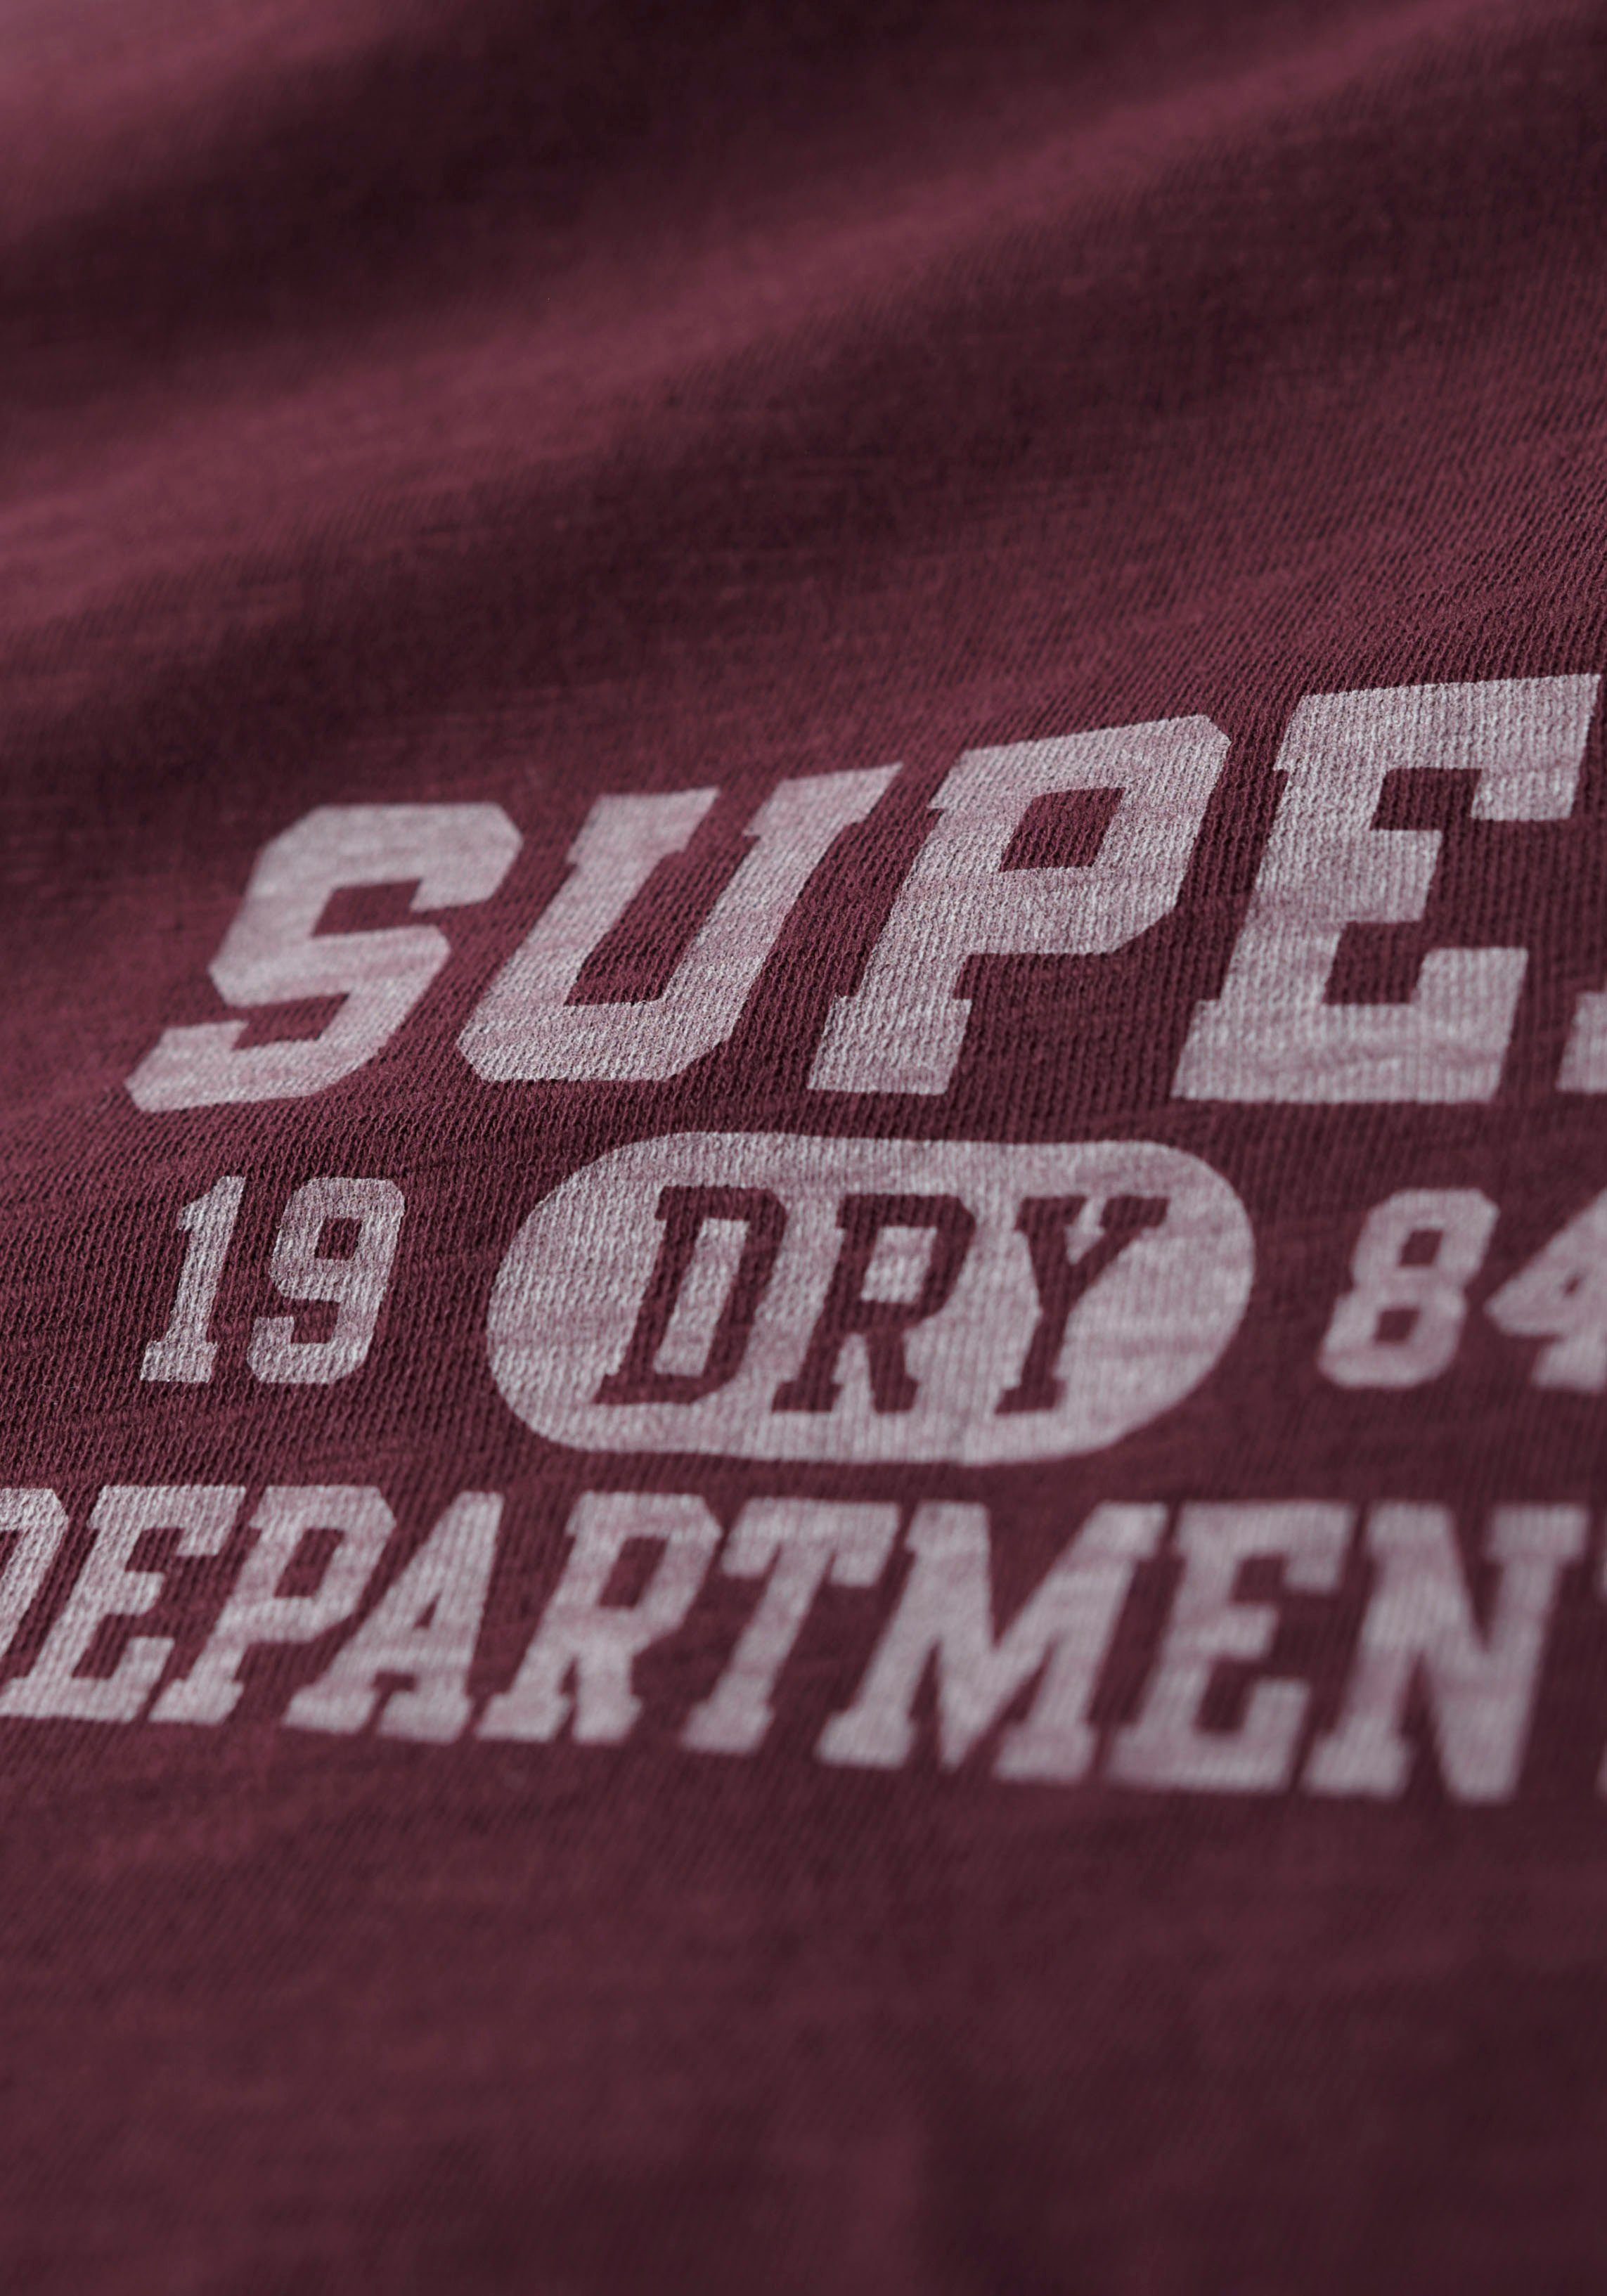 Superdry T-shirt ATHLETIC COLLEGE GRAPHIC TEE